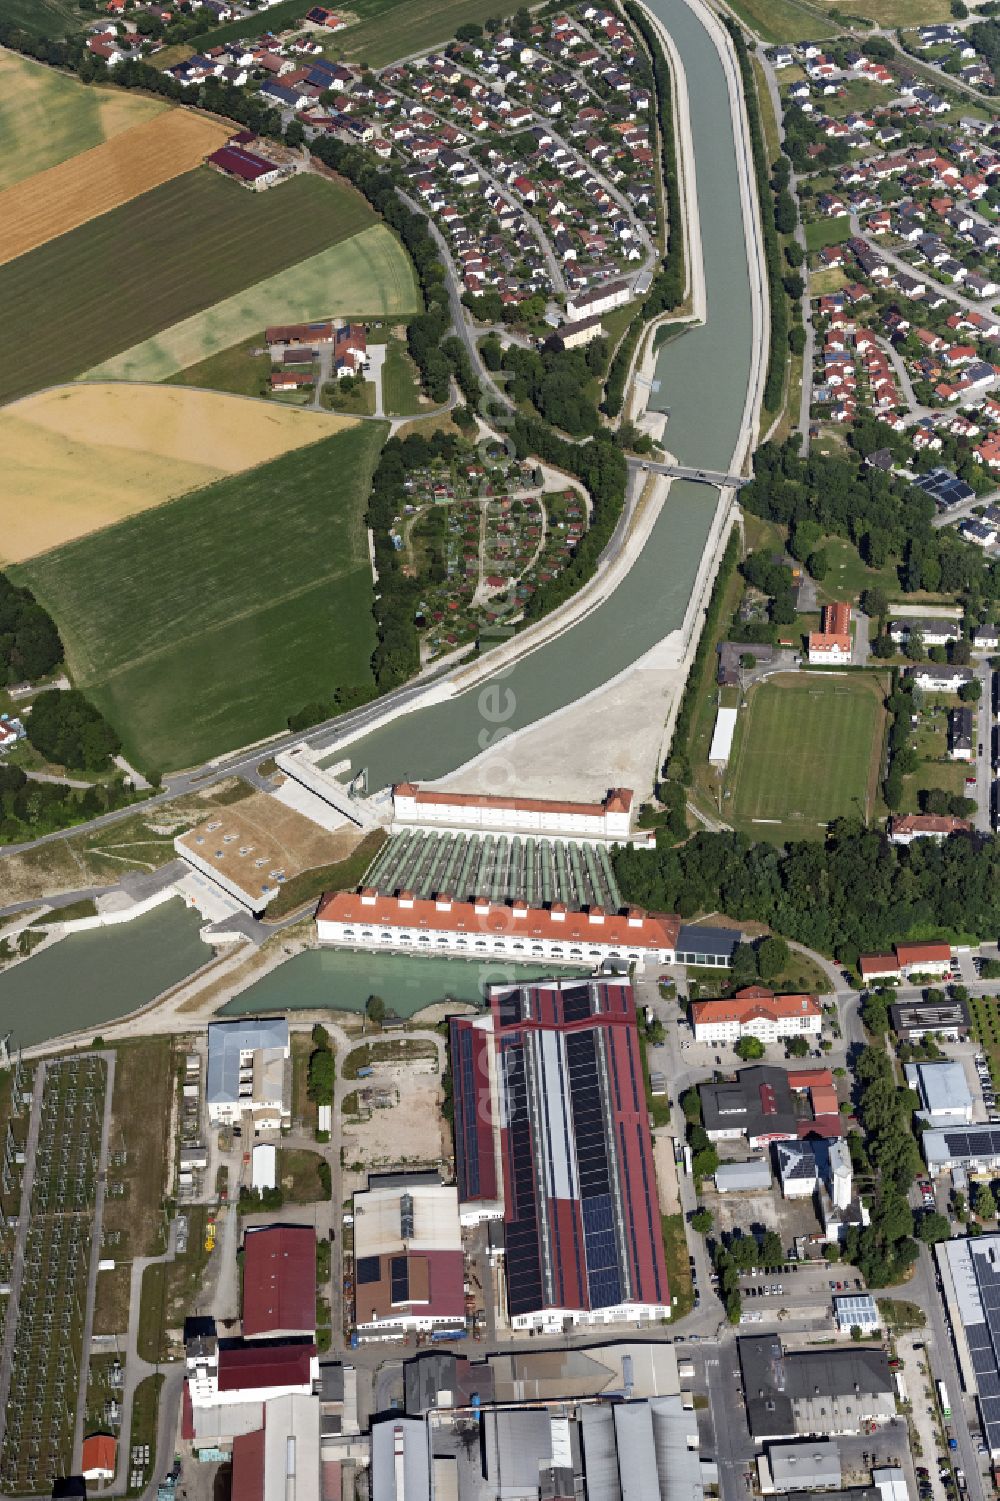 Aerial photograph Töging am Inn - Building and dams of the waterworks and hydroelectric power plant in Toeging am Innkanal in the state of Bavaria, Germany